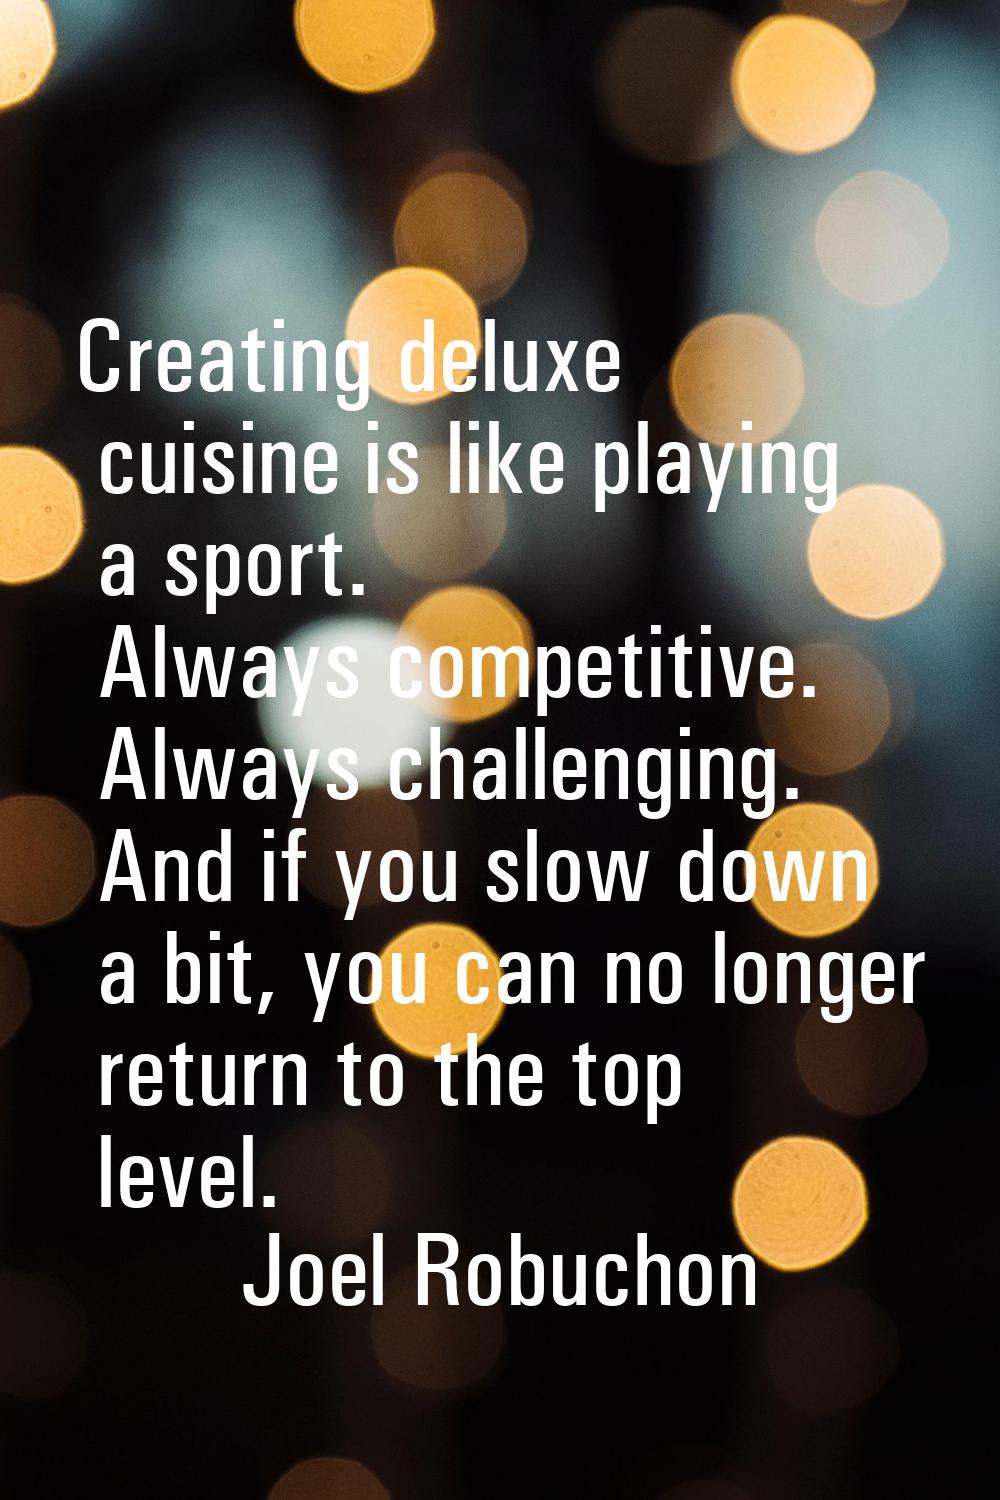 Creating deluxe cuisine is like playing a sport. Always competitive. Always challenging. And if you